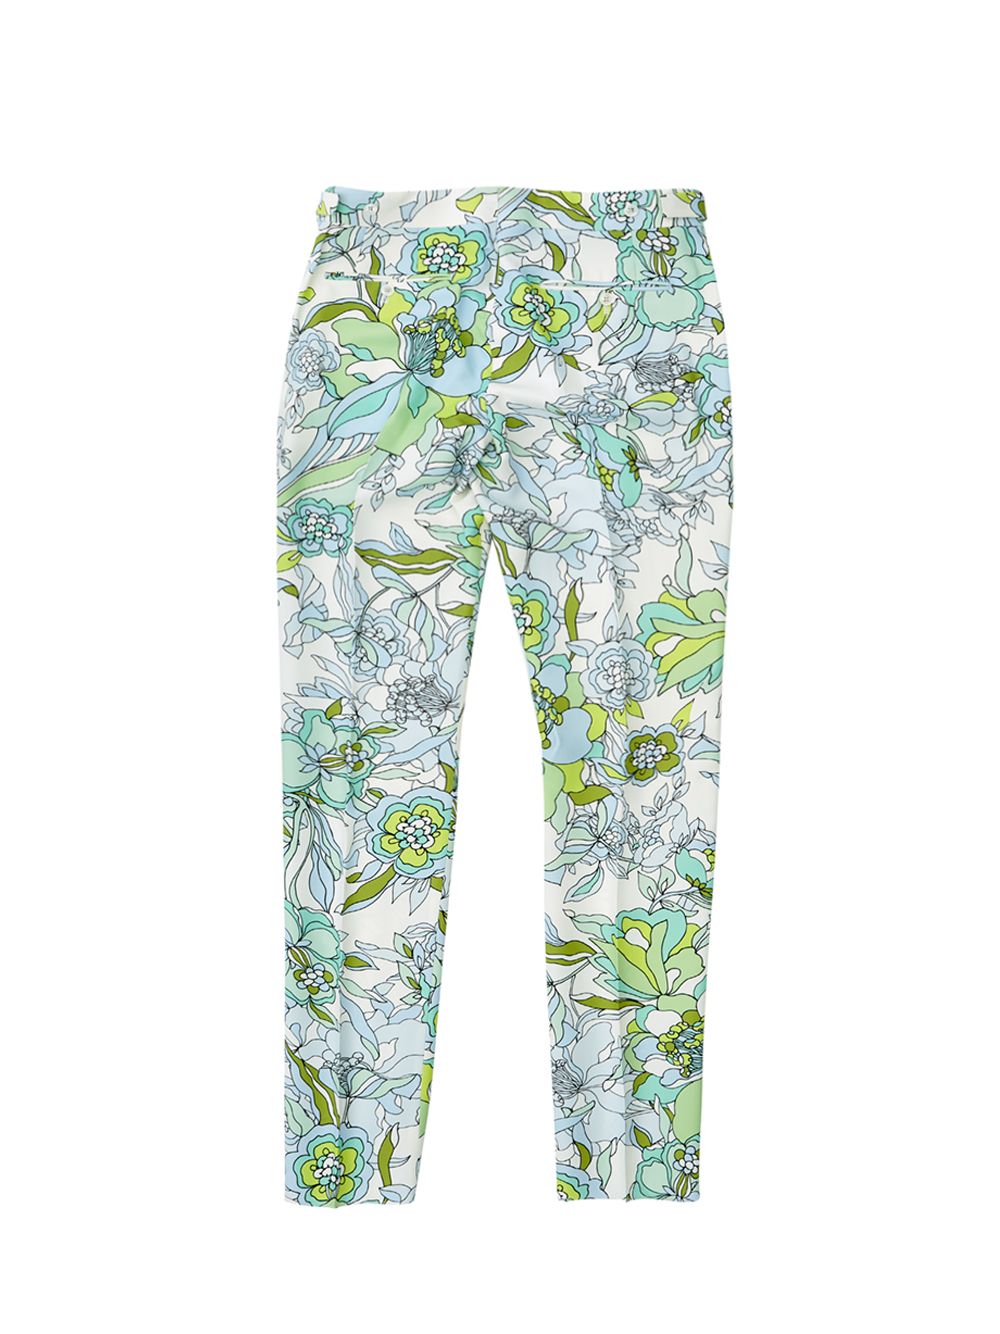 Tom Ford Printed Flowers allover Smoking Trousers in Green